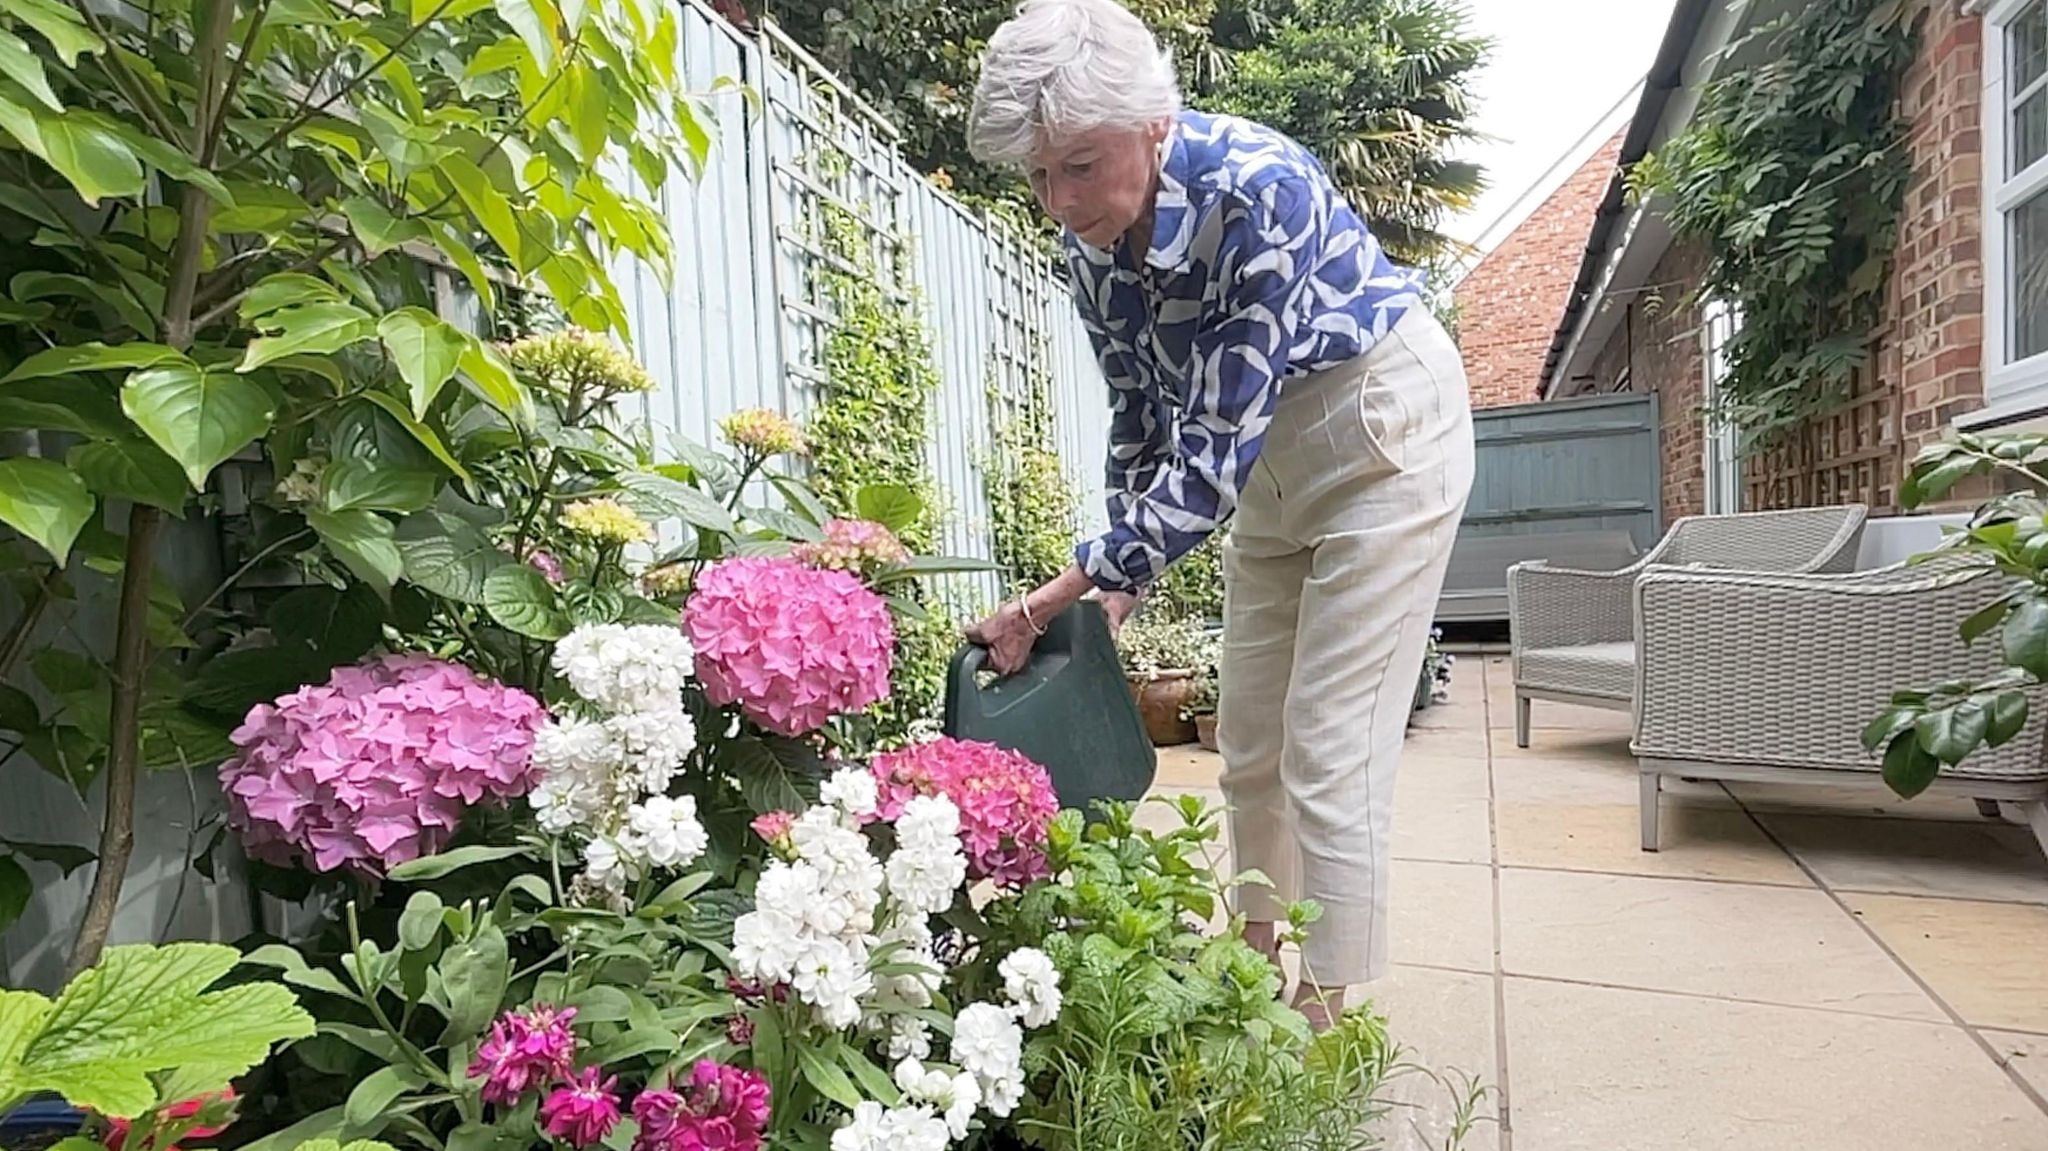 Mary gardening after her treatment